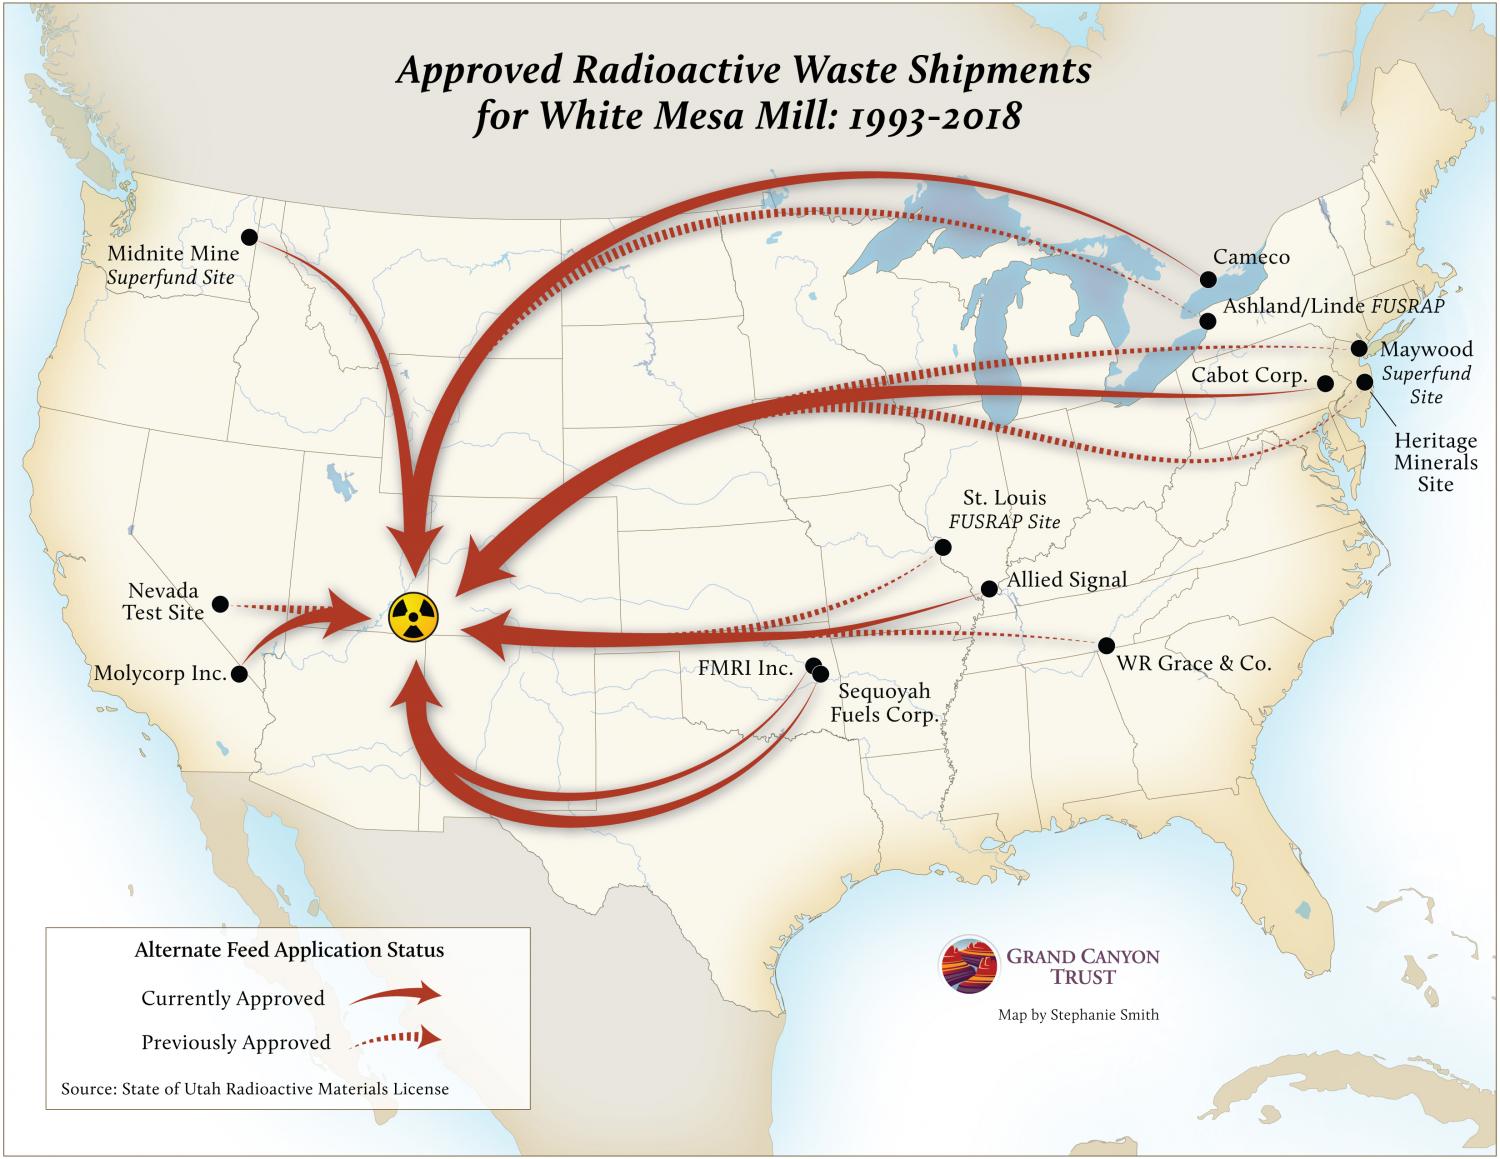 Map of Radioactive Waste Shipments Approved for White Mesa Mill